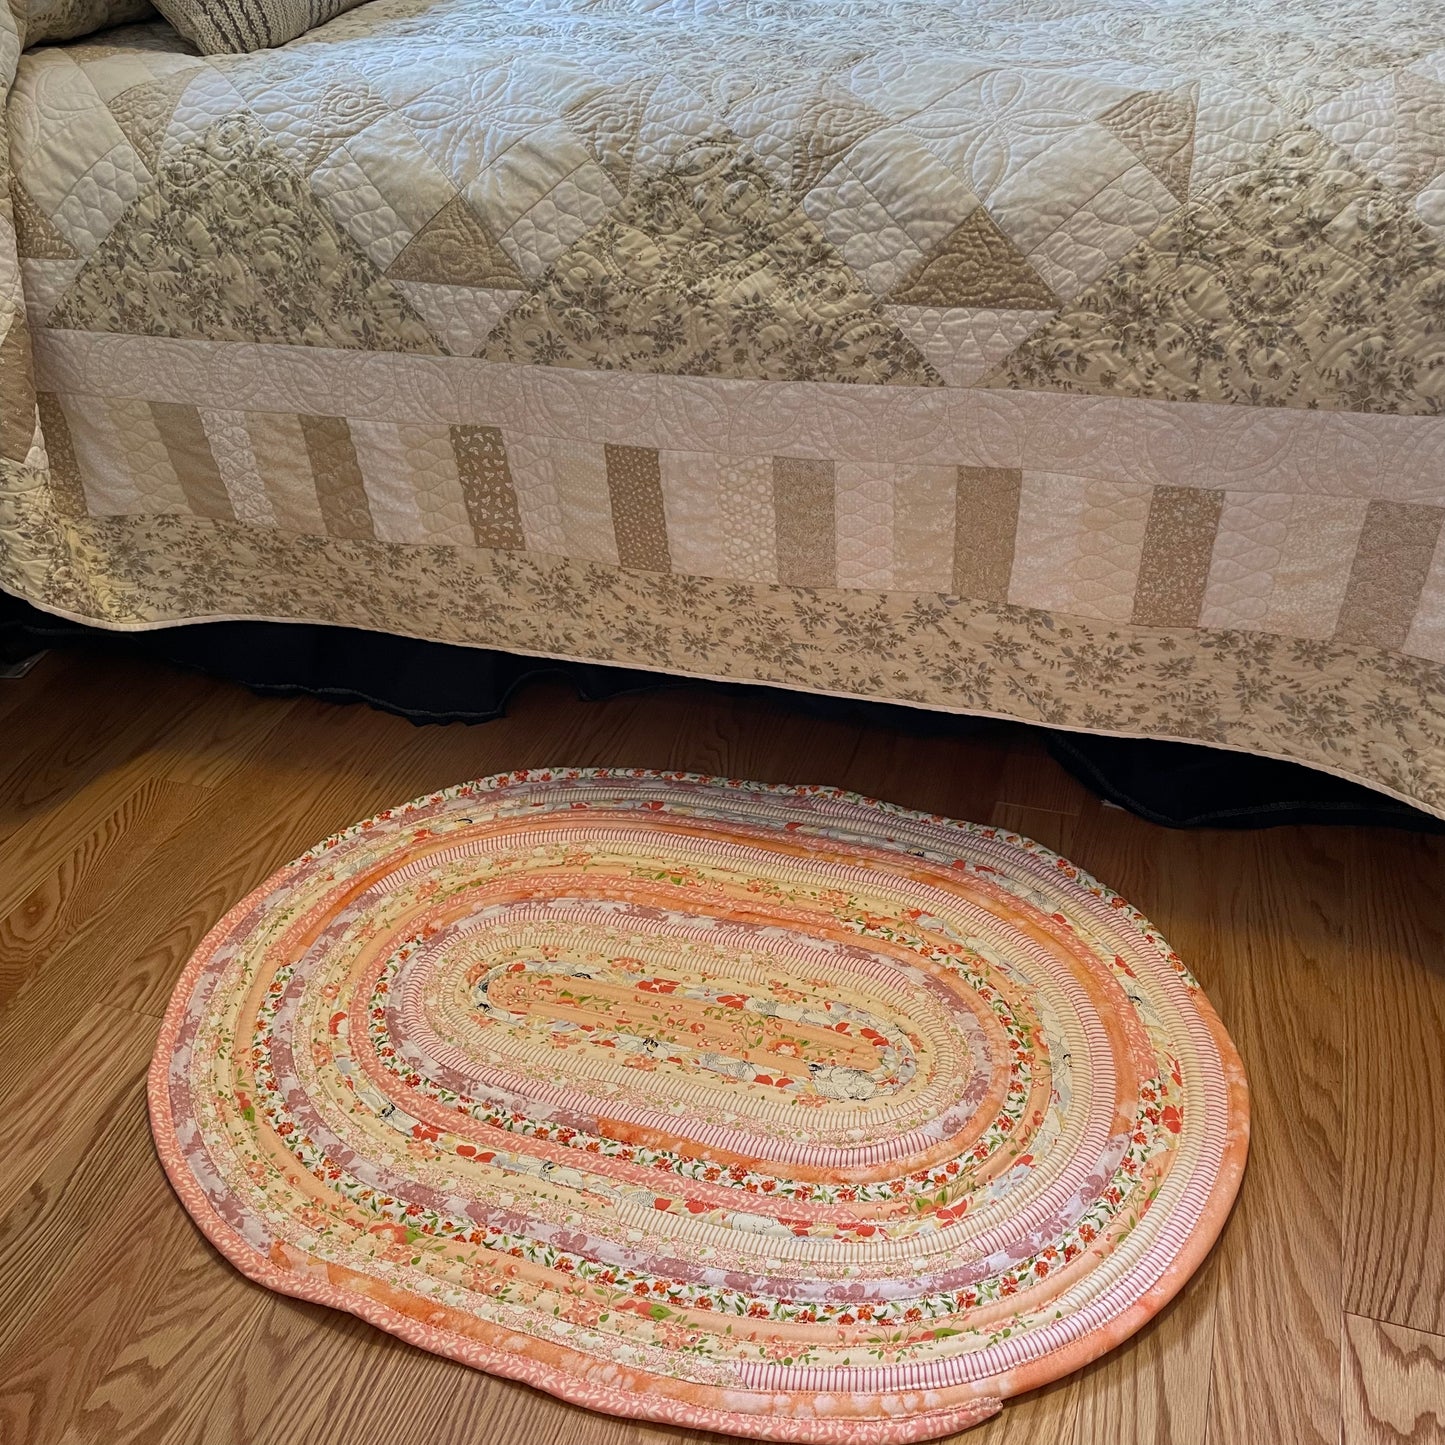 Handmade Canadian Cotton Kitchen Mat - Sink Rug - Washable and Durable and Pretty!